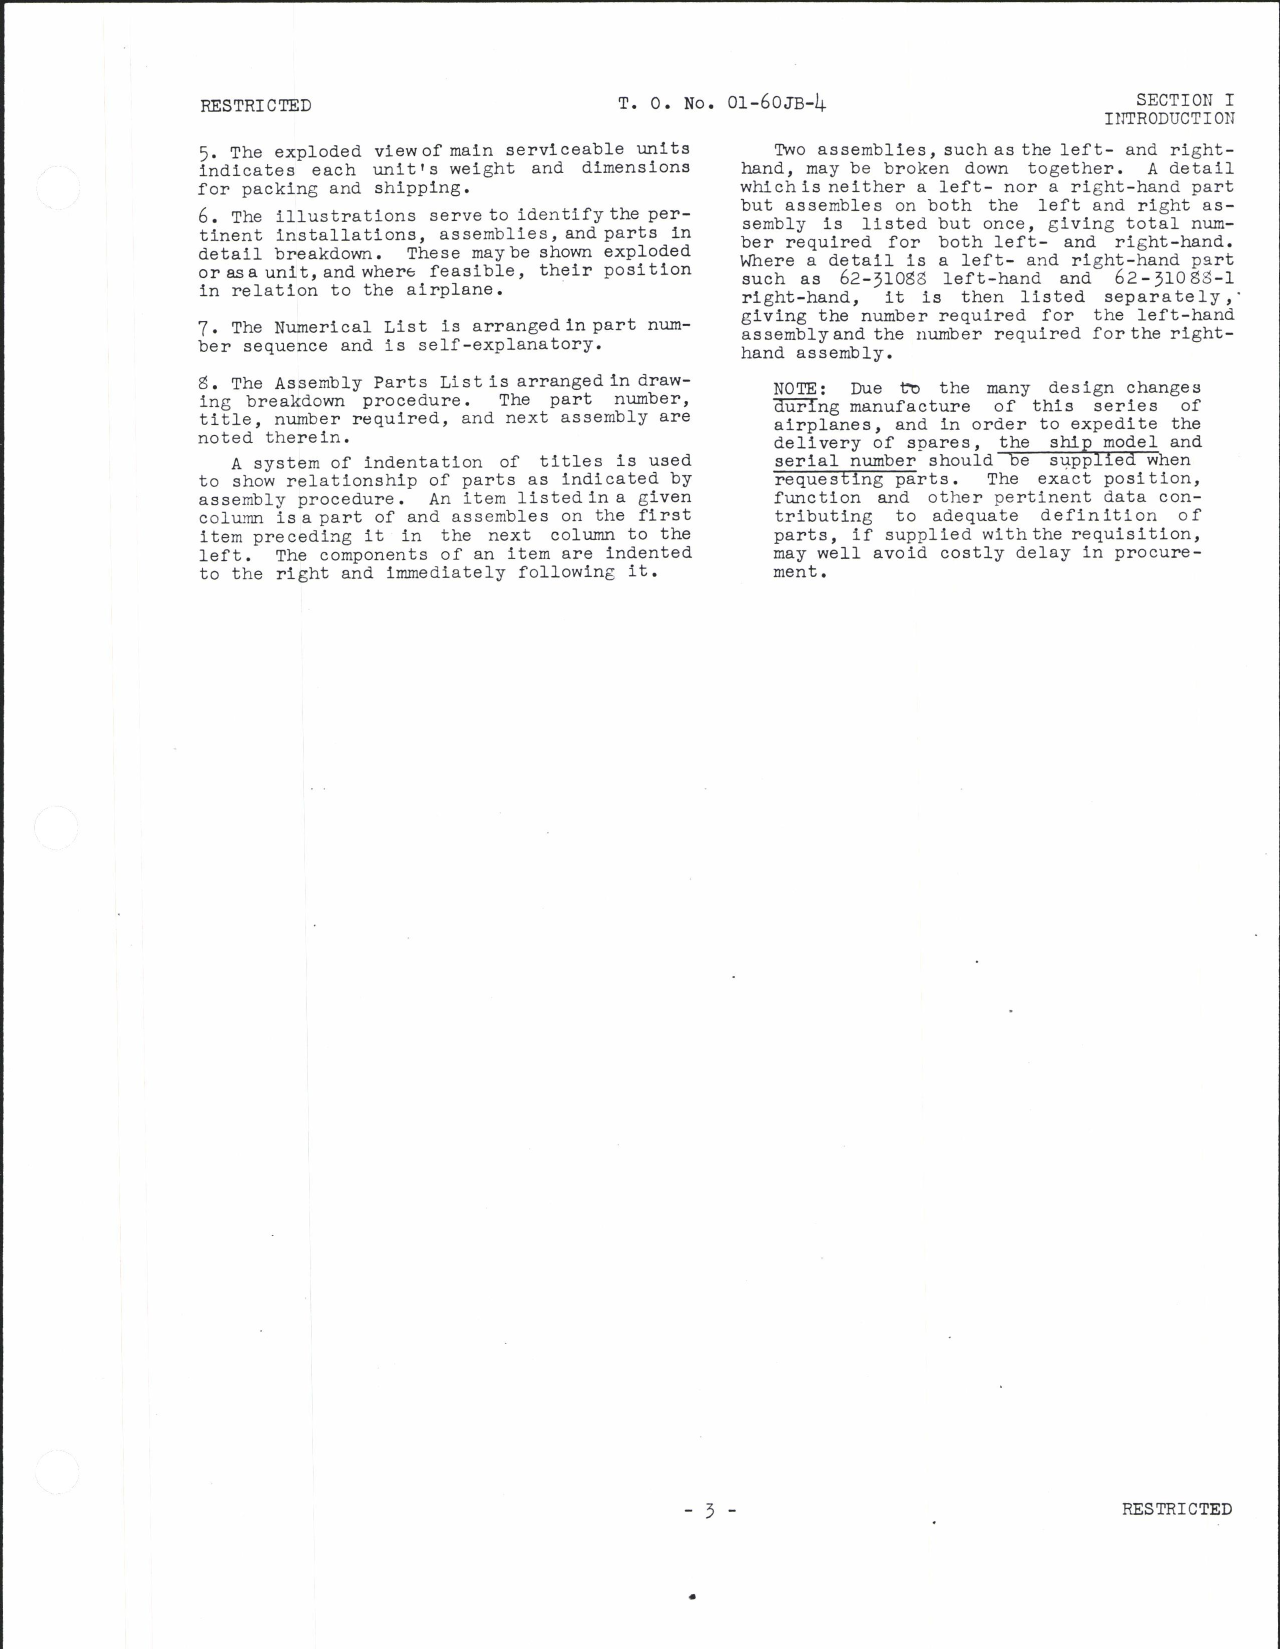 Sample page 7 from AirCorps Library document: Parts Catalog for P-51 Airplane